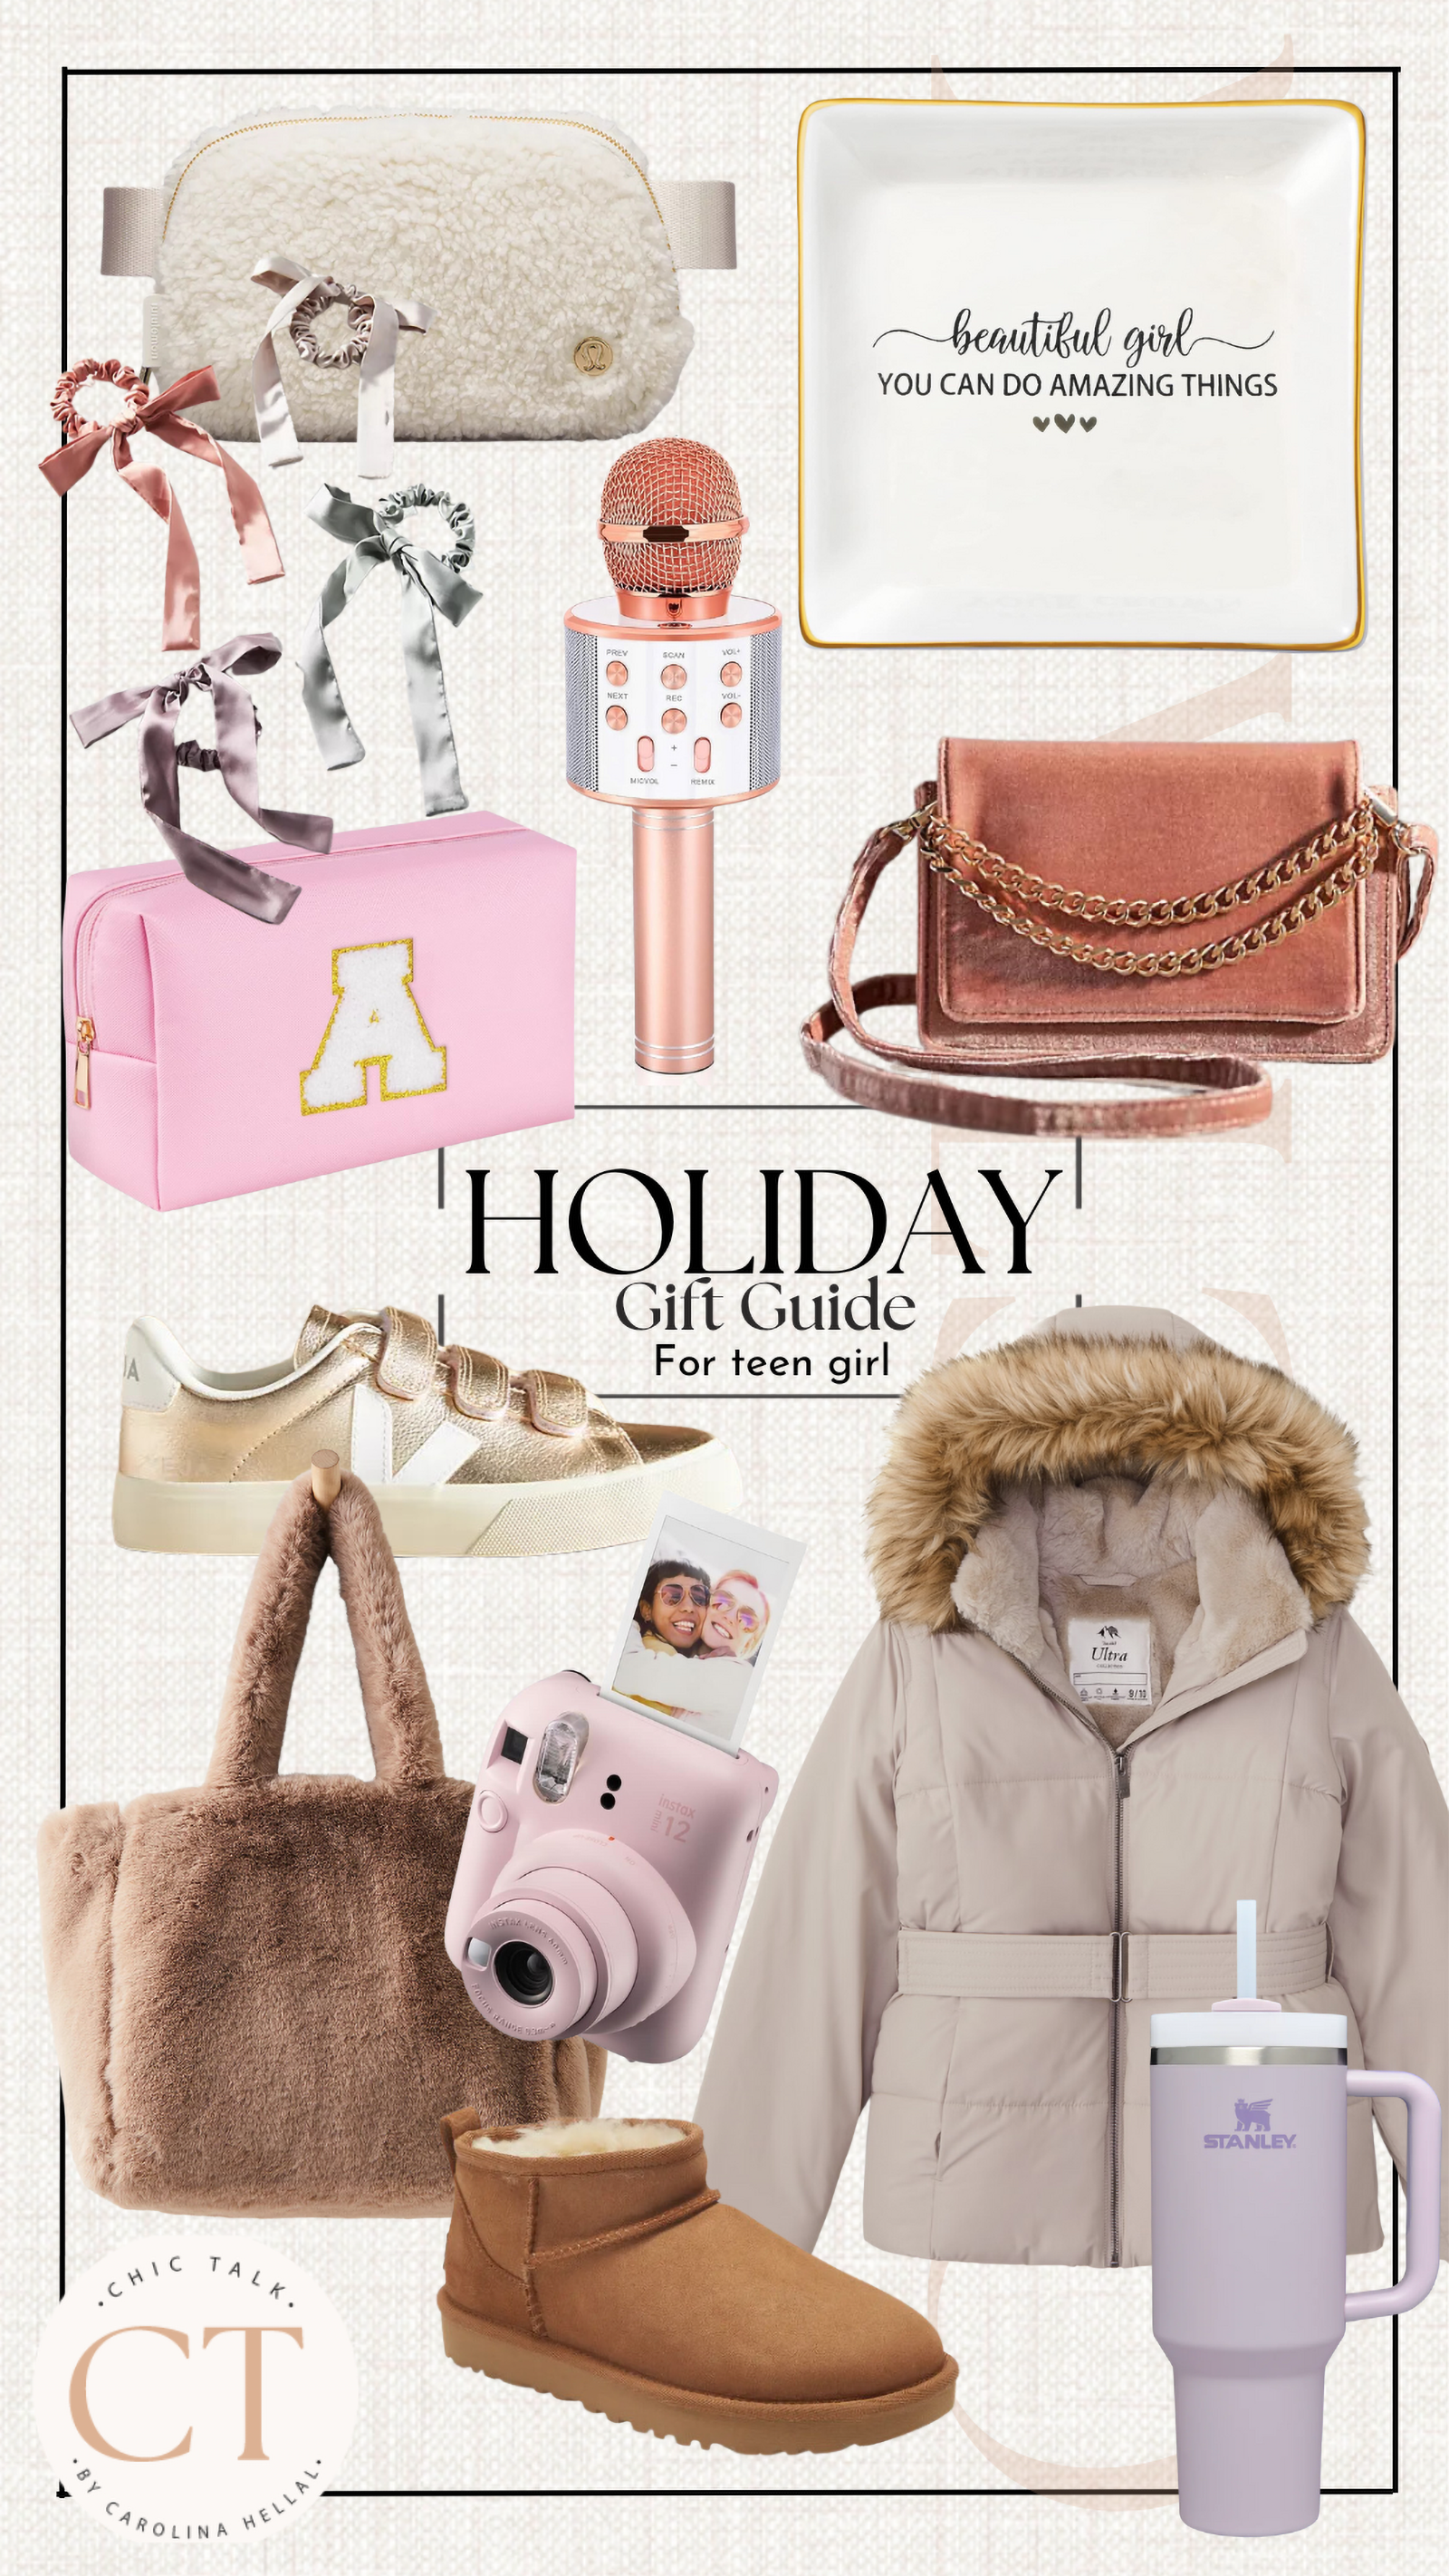 HOLIDAY GIFT GUIDE FOR TEEN GIRL CHIC TALK